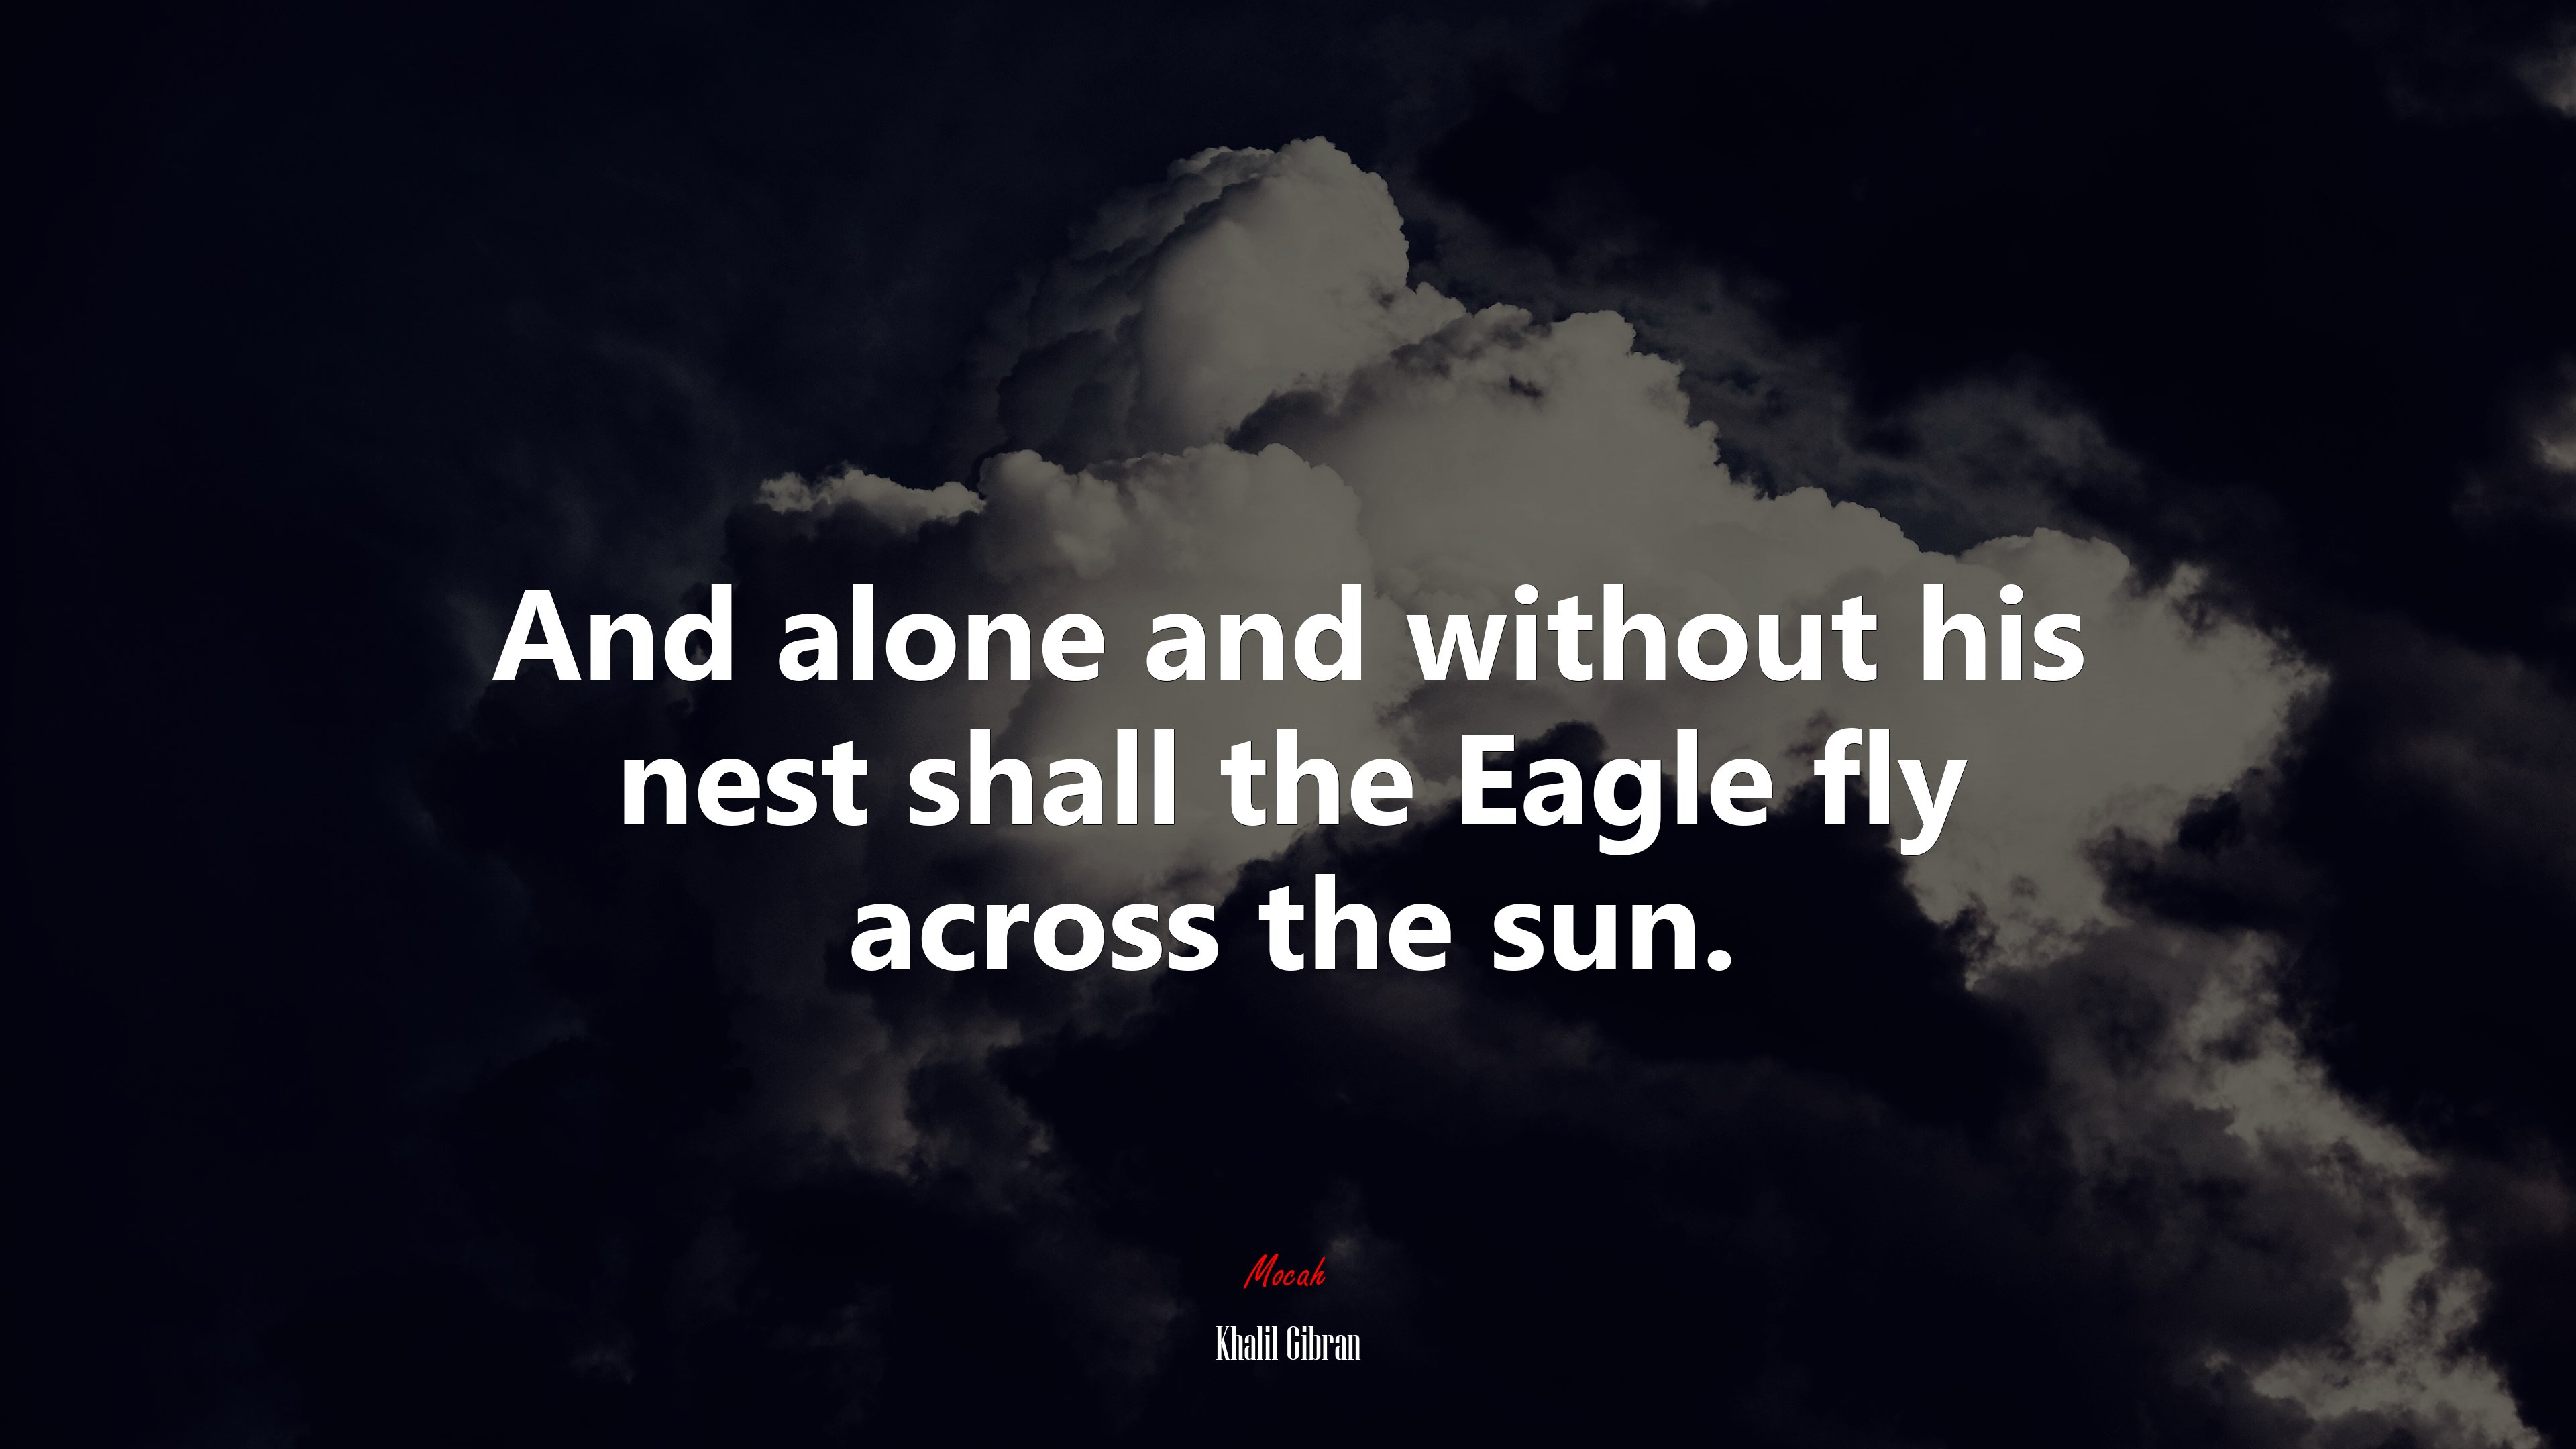 And alone and without his nest shall the Eagle fly across the sun. Khalil Gibran quote Gallery HD Wallpaper